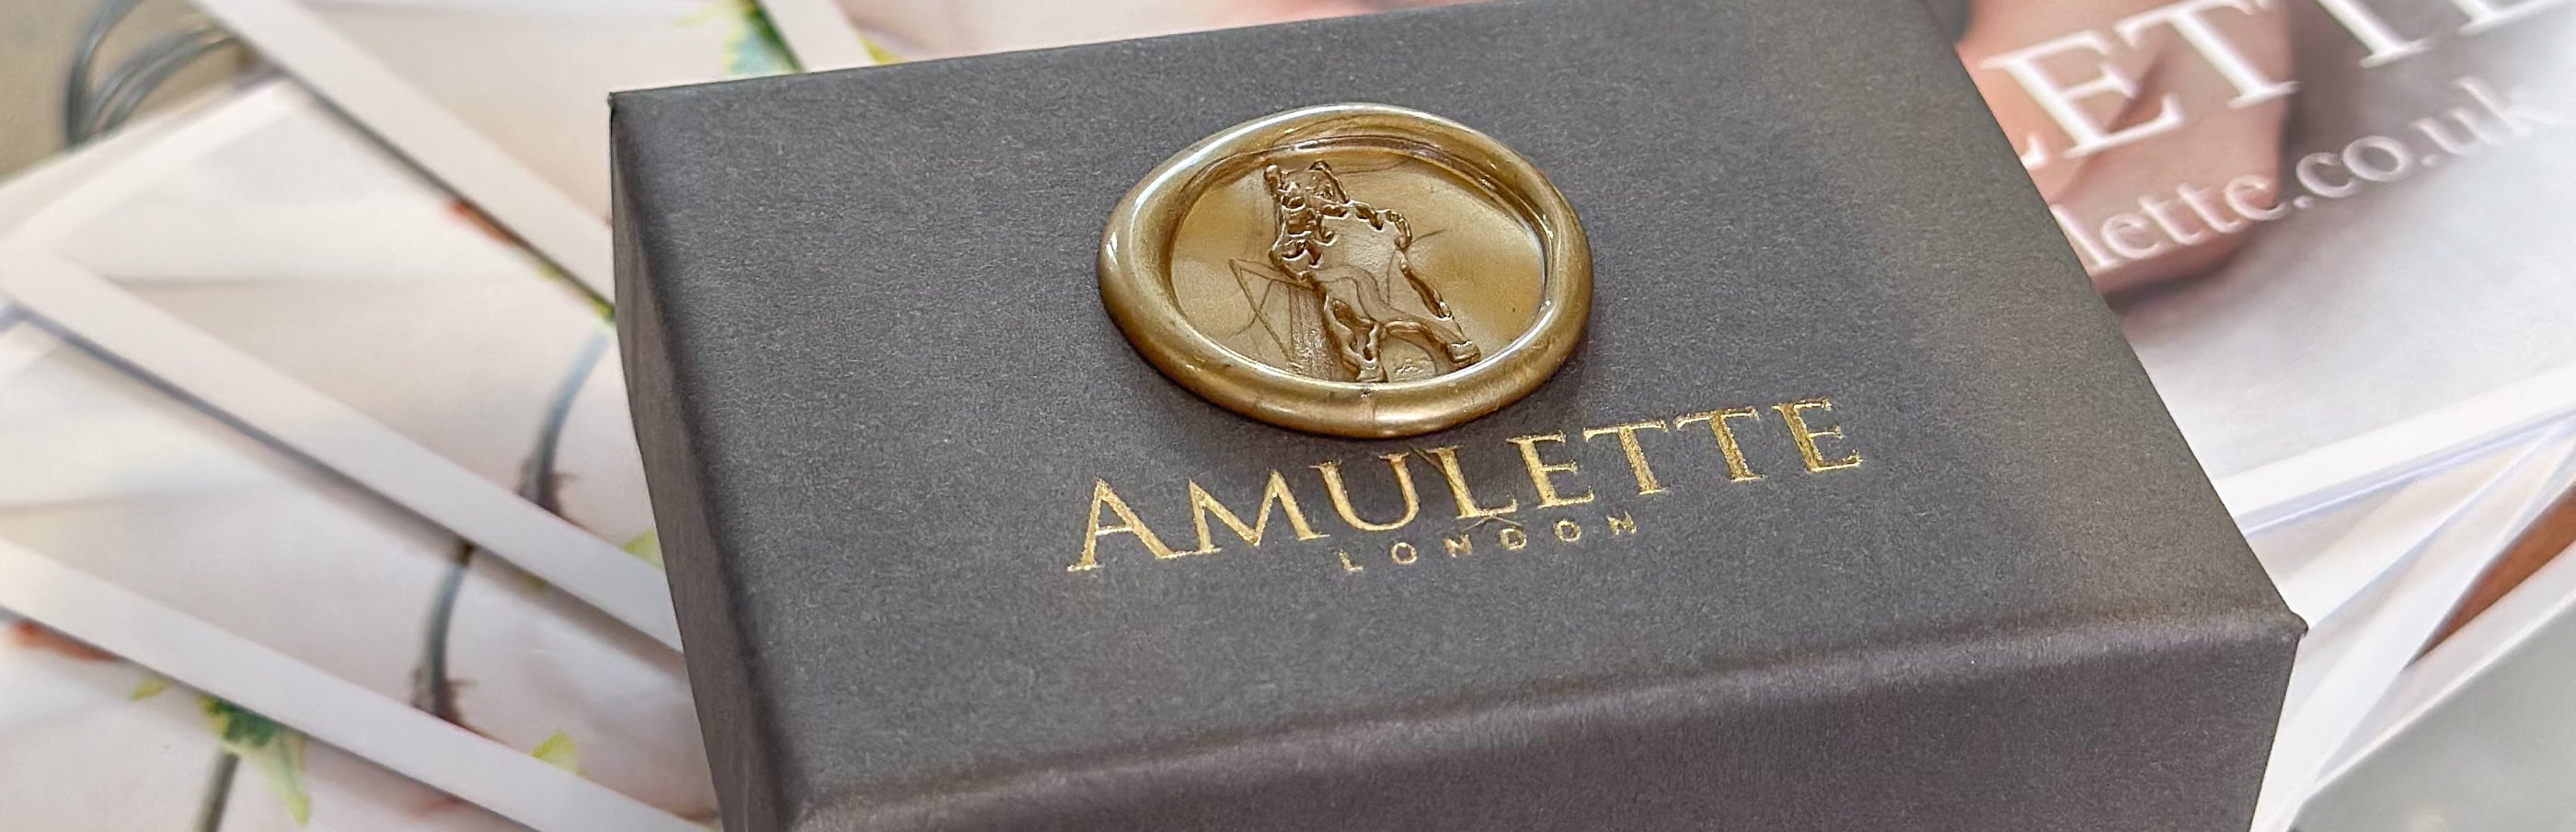 Jewellery gift vouchers online and in store, virtual gift cards for jewellery purchases from Amulette Jewellery UK